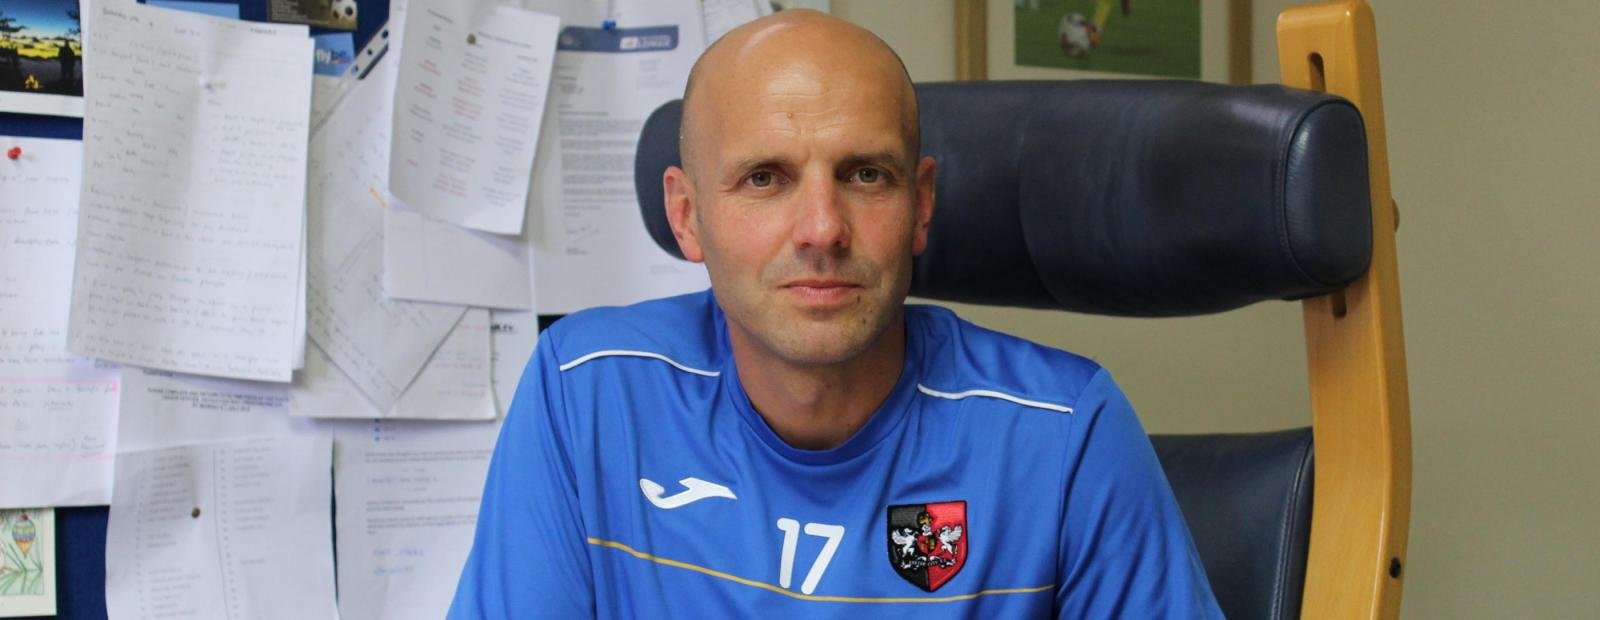 EXCLUSIVE: Exeter City manager Paul Tisdale